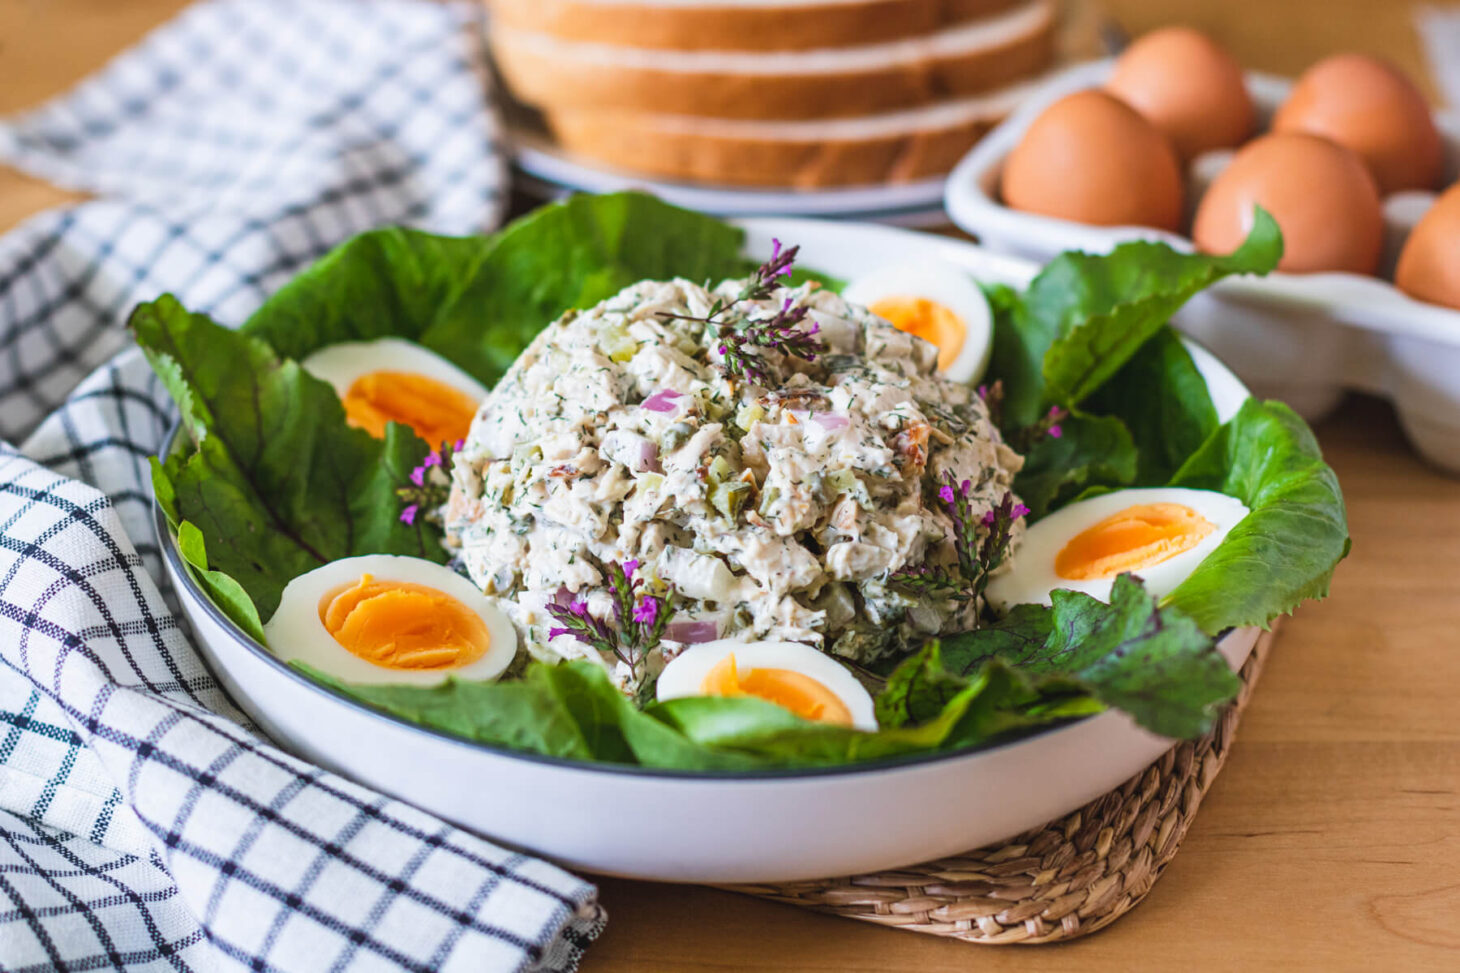 A lettuce lined bowl containing a scoop of Chicken egg salad and hard boiled egg halves with bright yellow yolks.